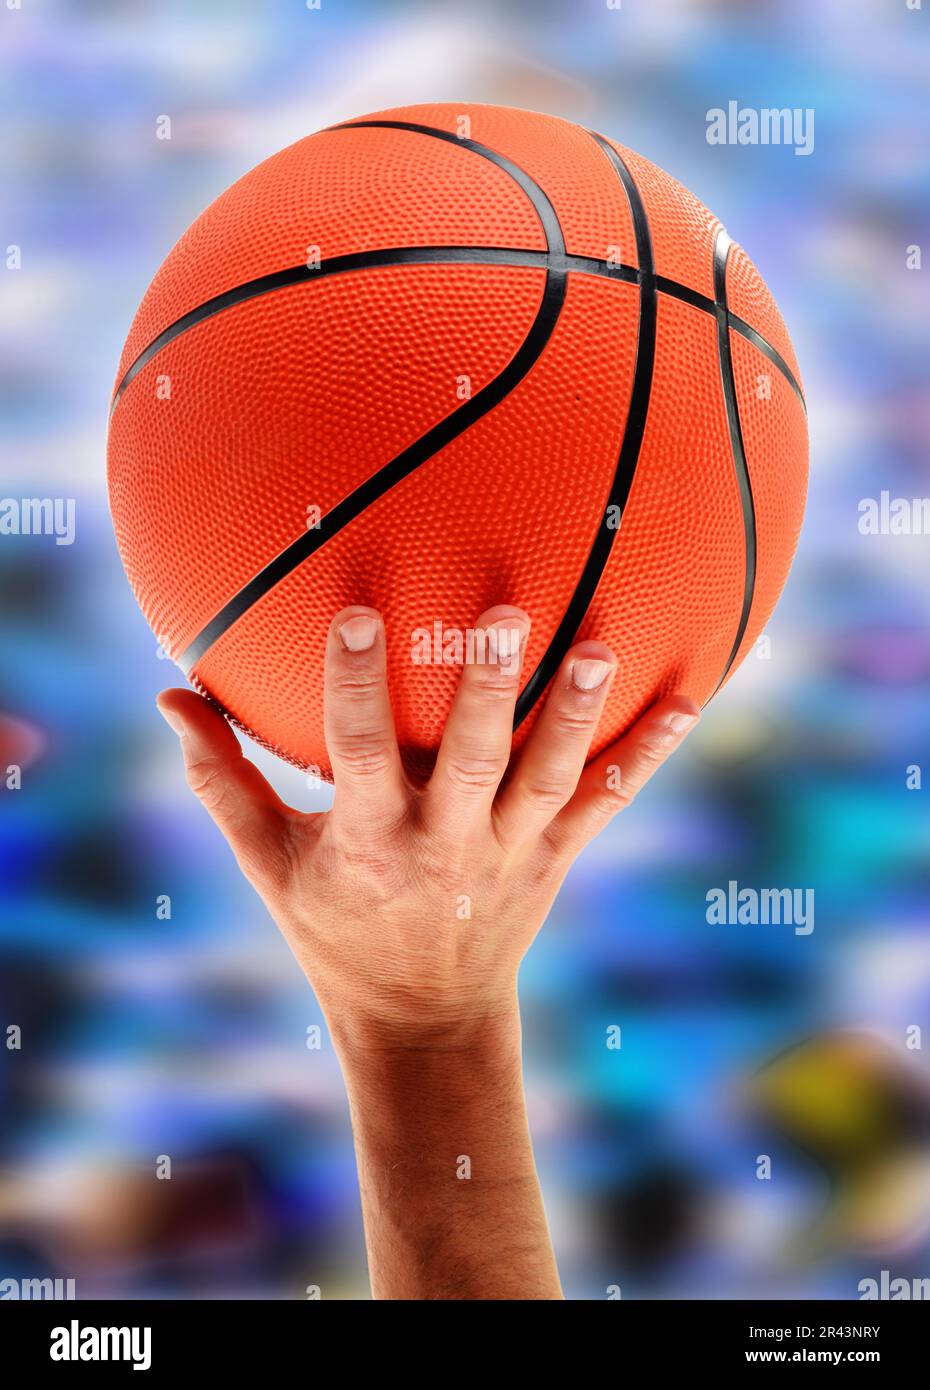 Hands catching basketball Stock Photo